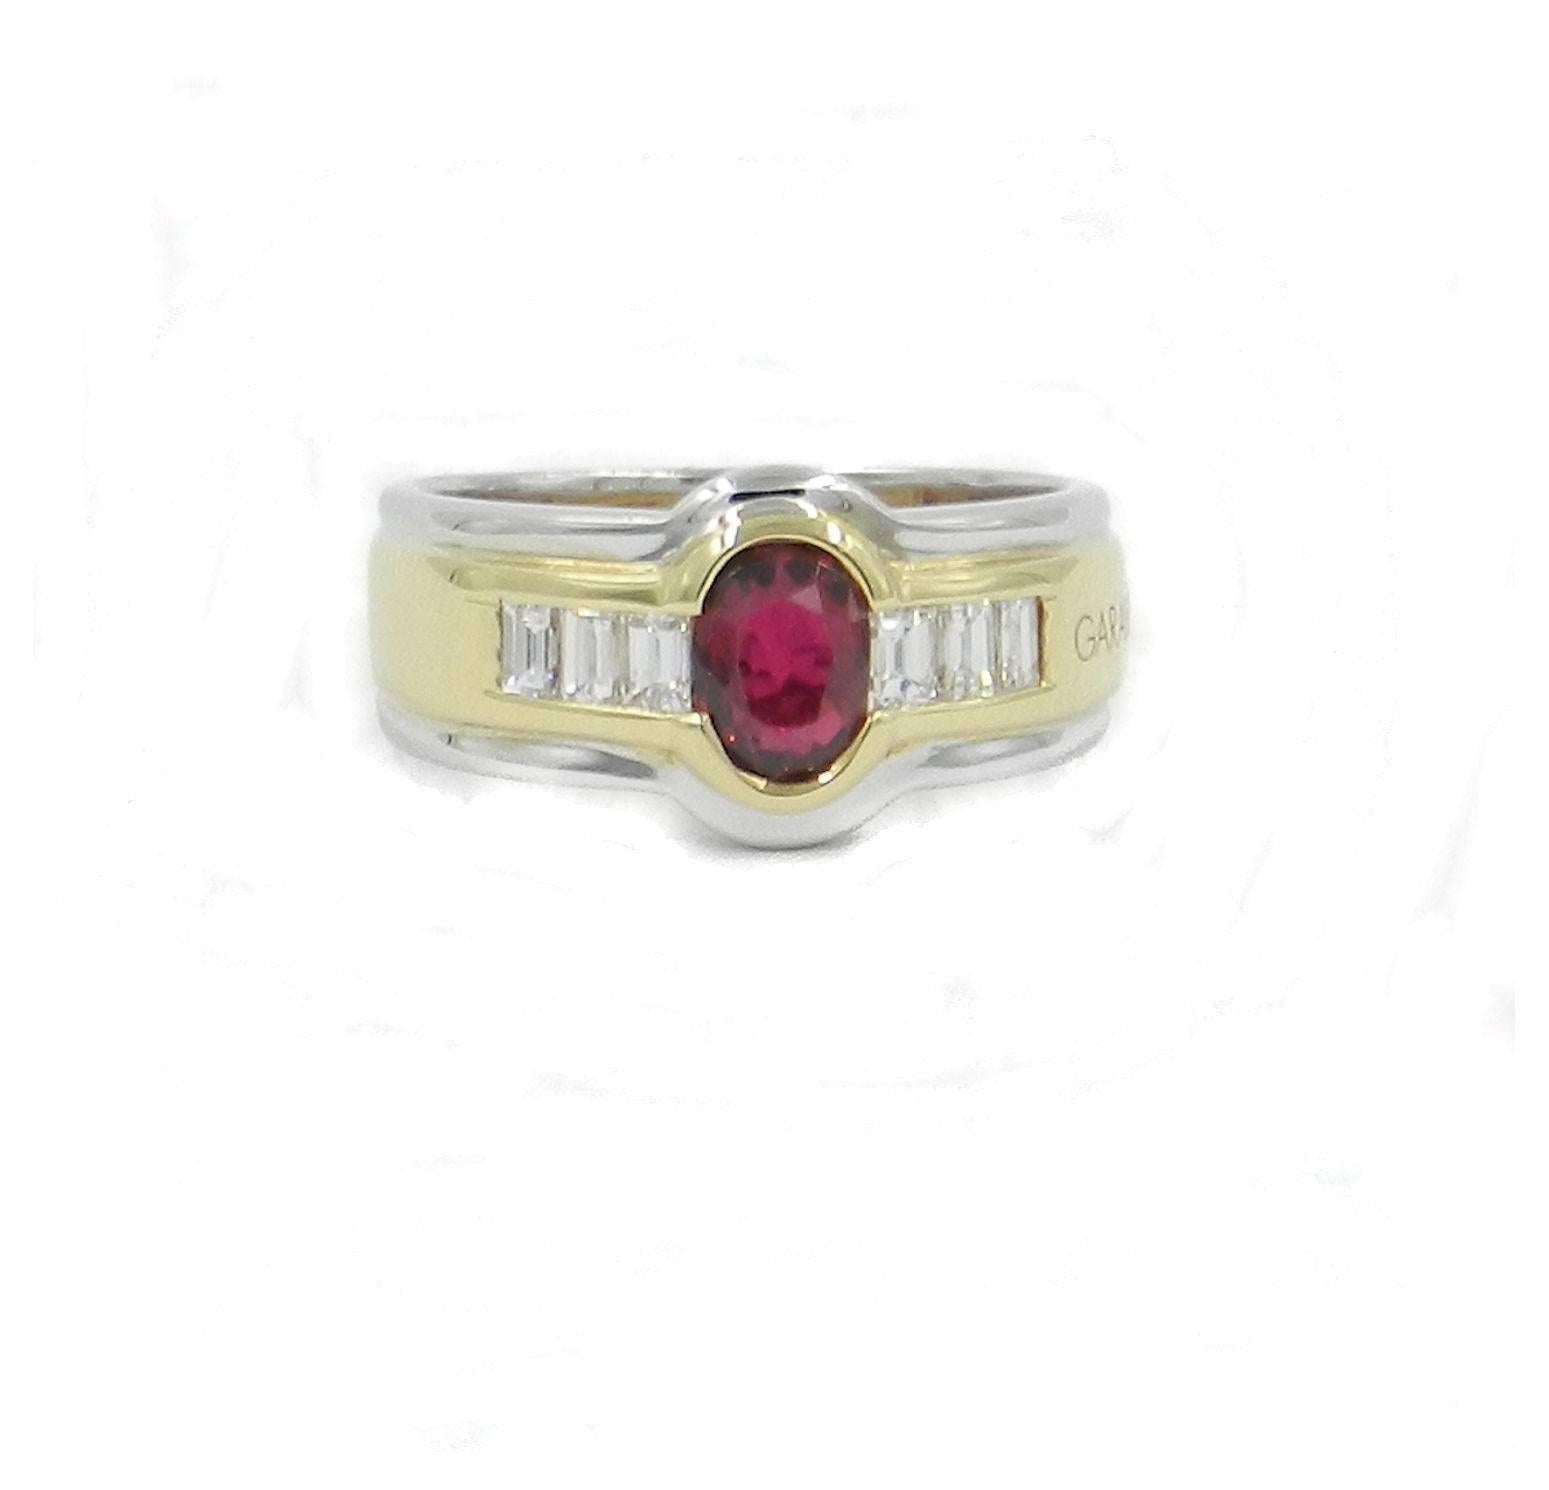 Ring in 18kt yellow and white gold with oval shape red ruby weight carat 0.82 and baguette cut white diamonds total weight carat 0.42 
Ring easy to wear every day on the ring finger or the pinky finger. Circa 1960. Ring size 53